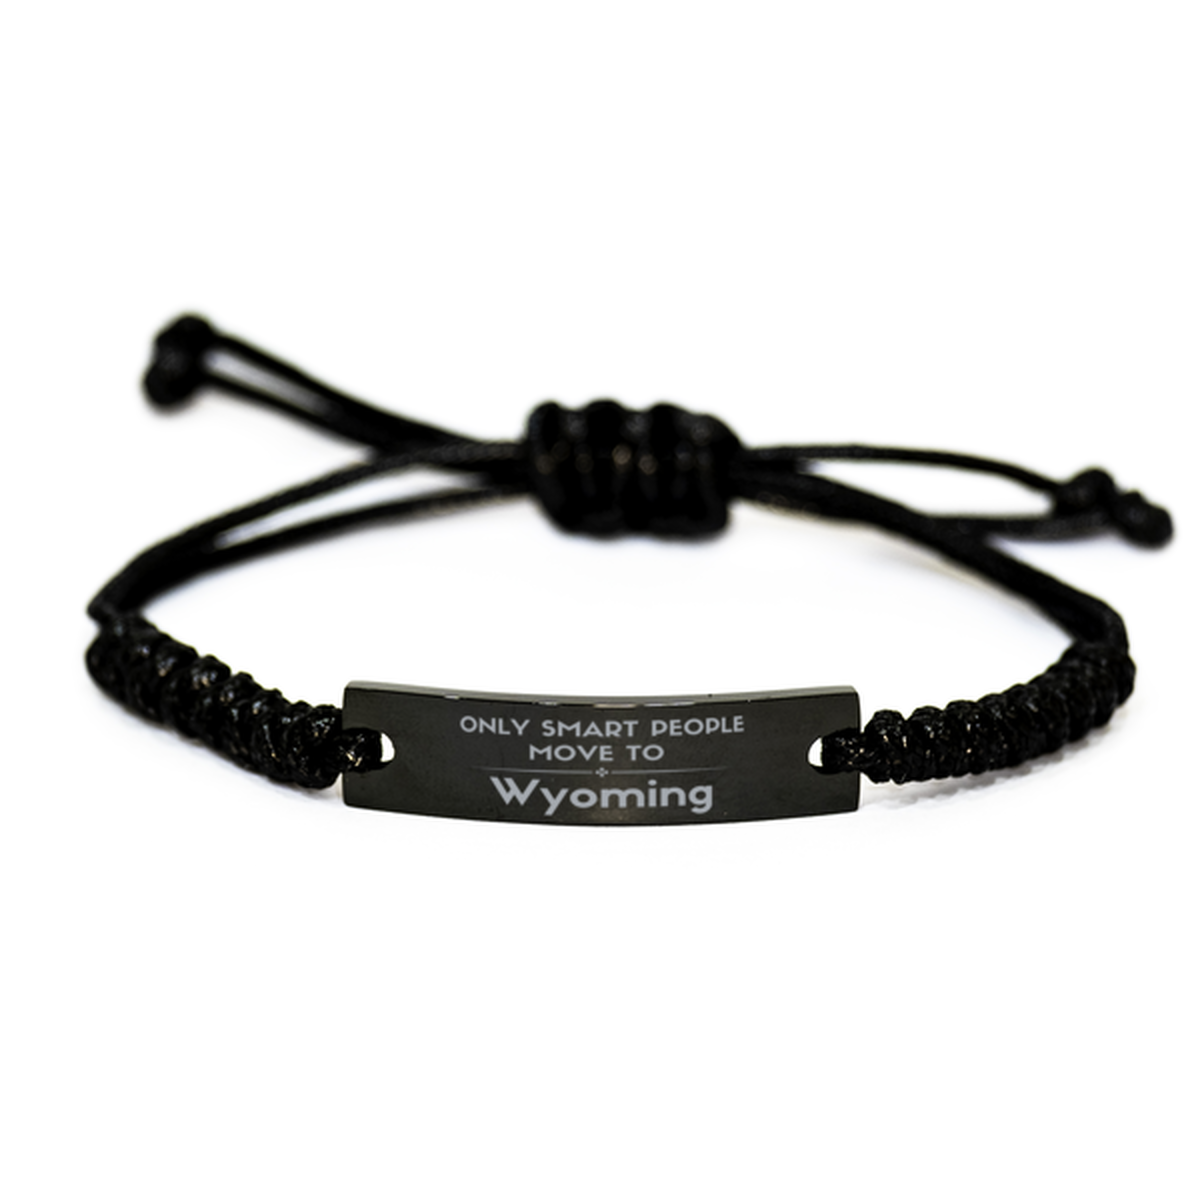 Only smart people move to Wyoming Black Rope Bracelet, Gag Gifts For Wyoming, Move to Wyoming Gifts for Friends Coworker Funny Saying Quote